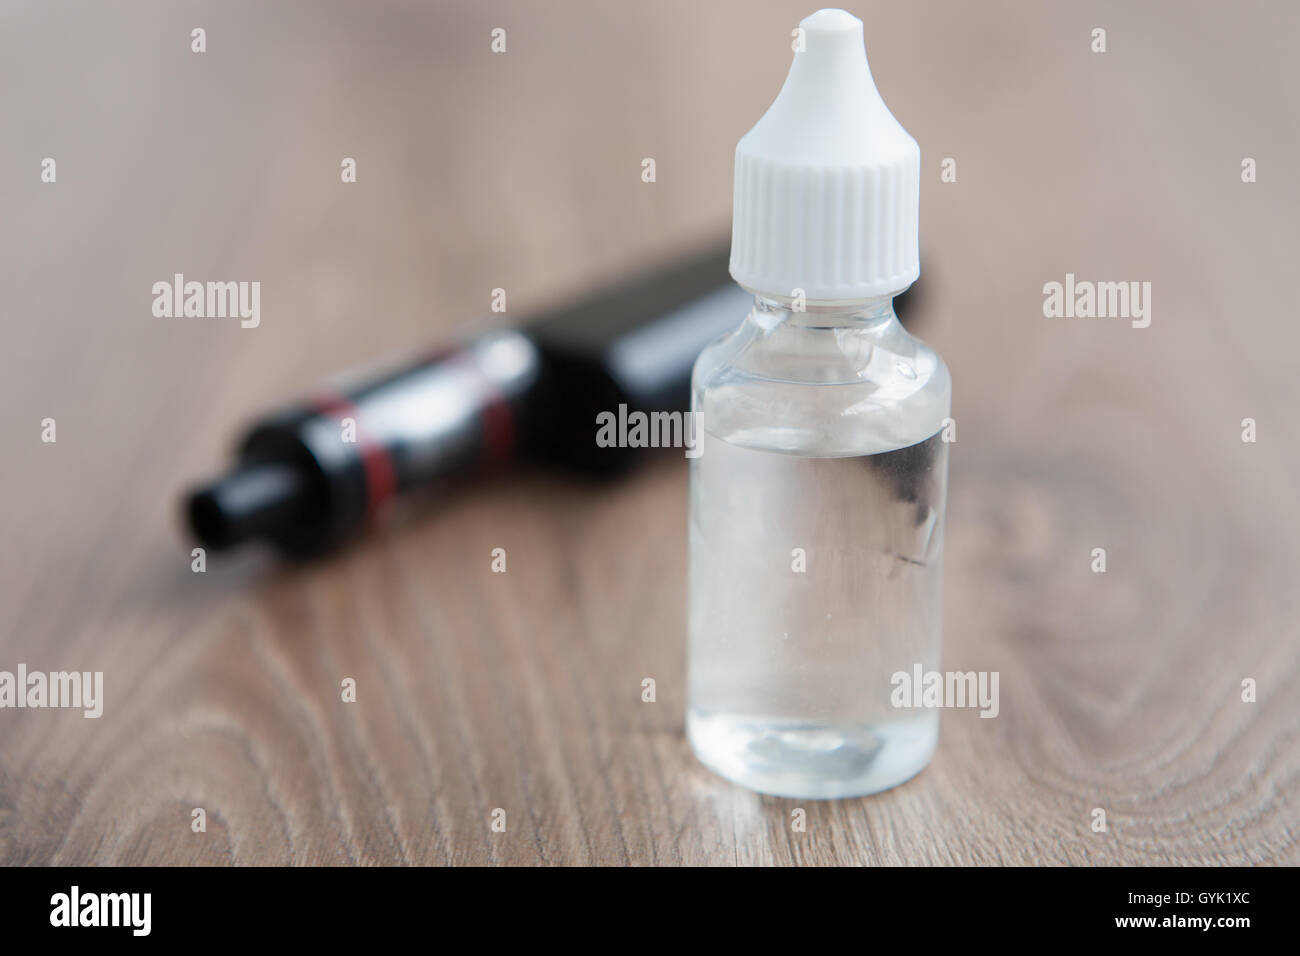 E-juice for e-cig and vaping device. Vaporizer and tasty filling e-liquid. Refill liquid tobacco with propylen glicol and glycerin base. Place text on transparent bottle. Stock Photo